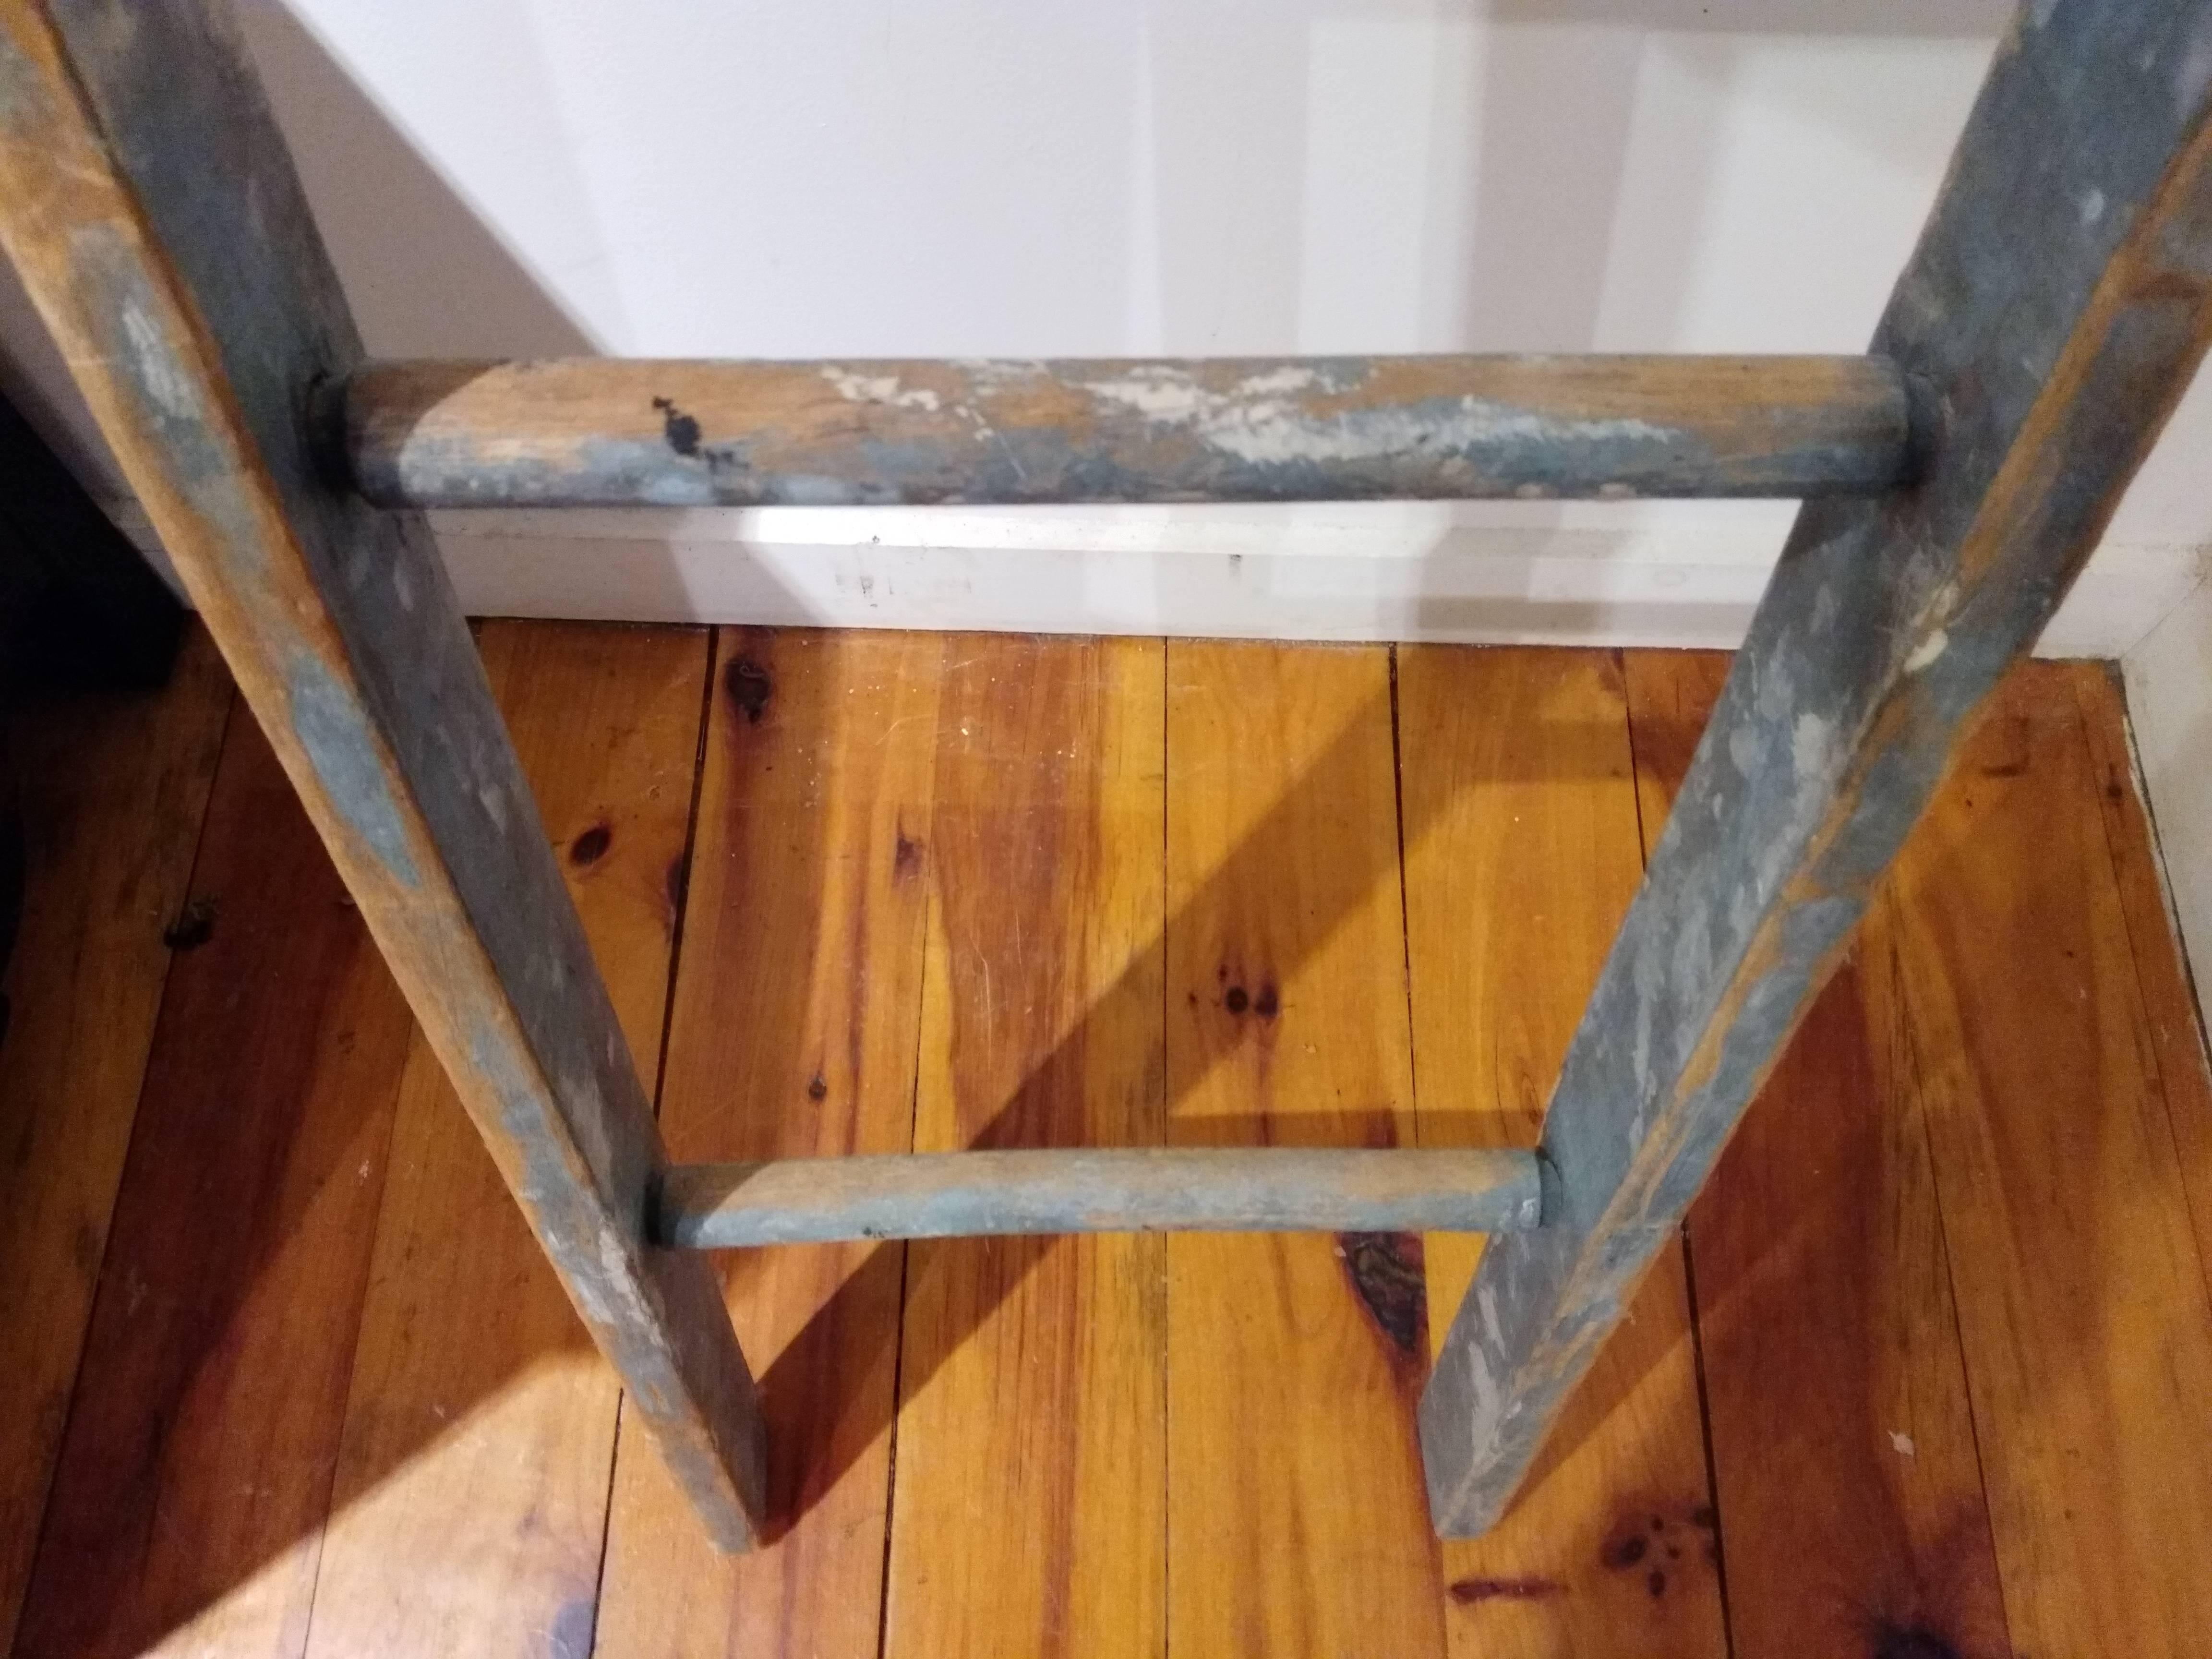 This wooden American ladder from 1880 was used in the fields to pick apples. In a home we love these pieces in a bathroom with towels on the cross bars or in a den with magazines. The worn grey blue original paint is a soft color.